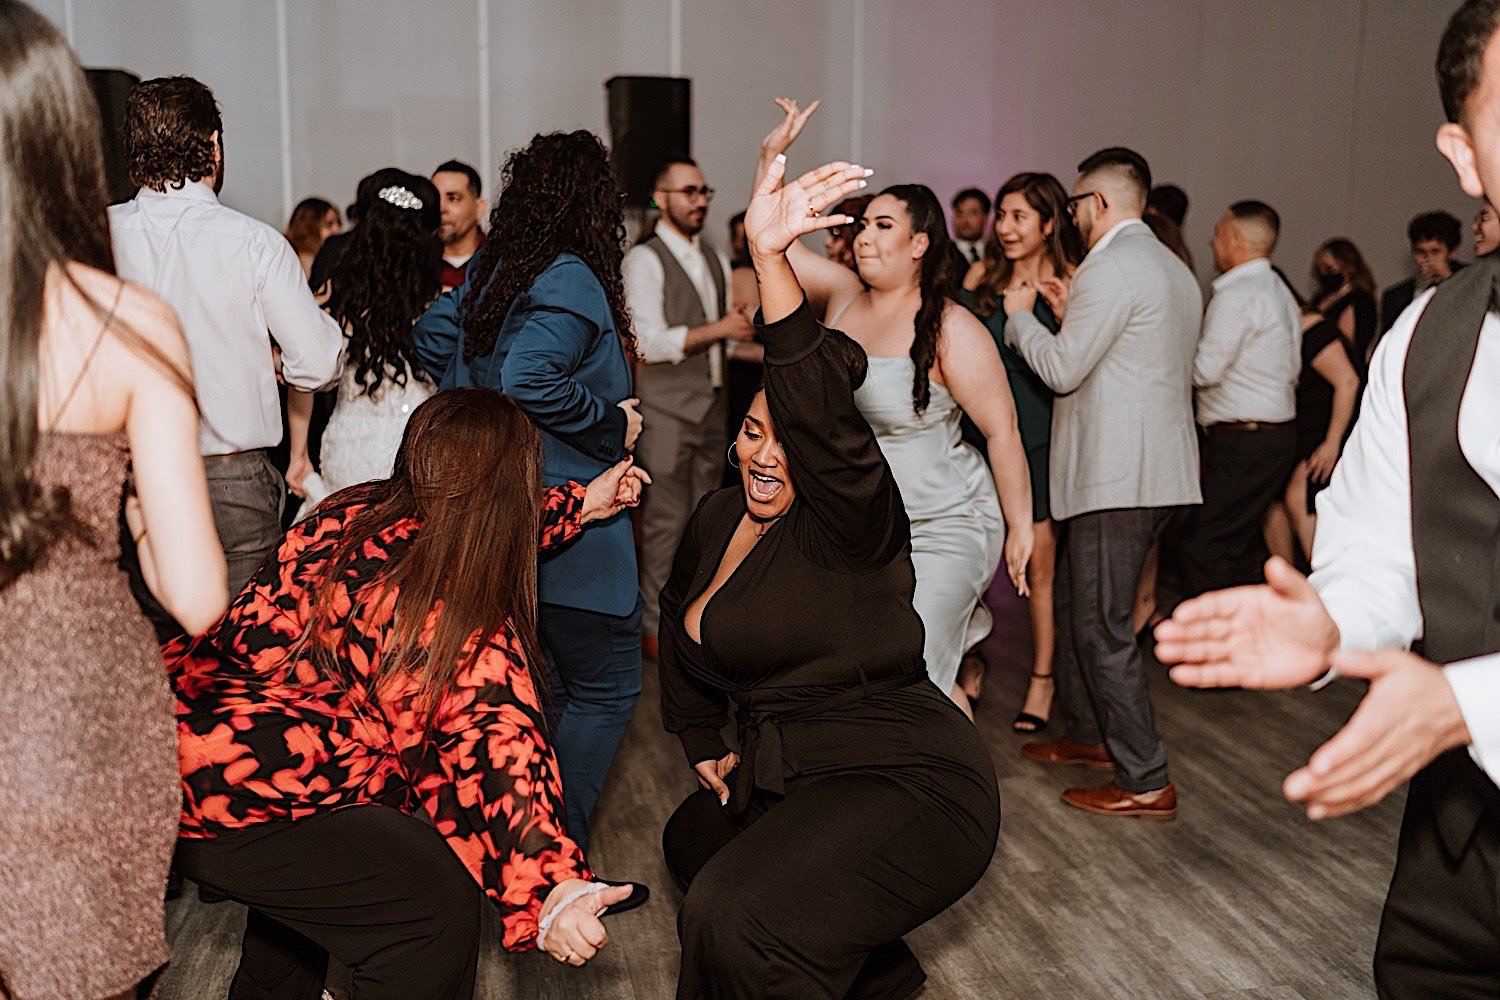 Guests dance during Chicagoland ballroom wedding reception